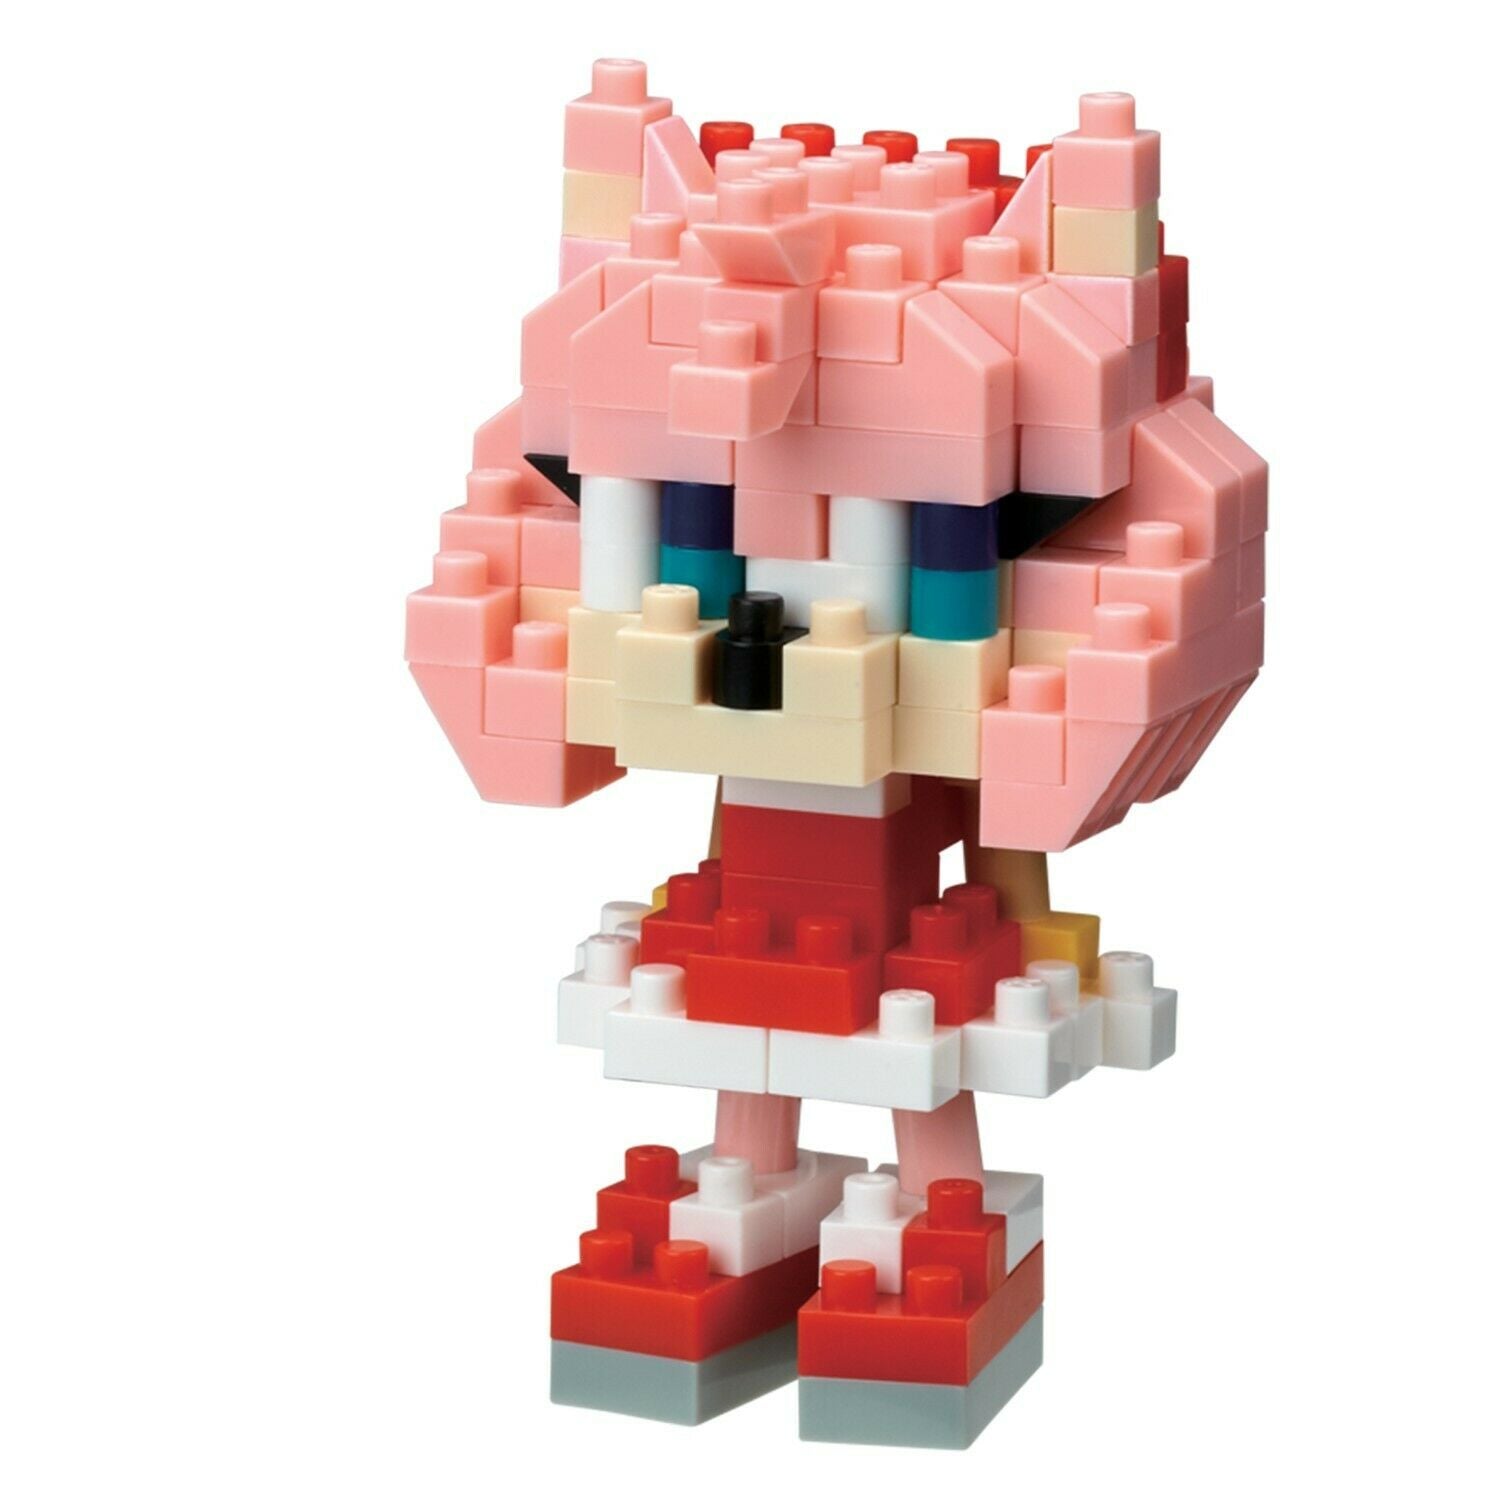 NBCC085 Nanoblock Amy Mini Collection Series 120+ pieces Age 12 years+